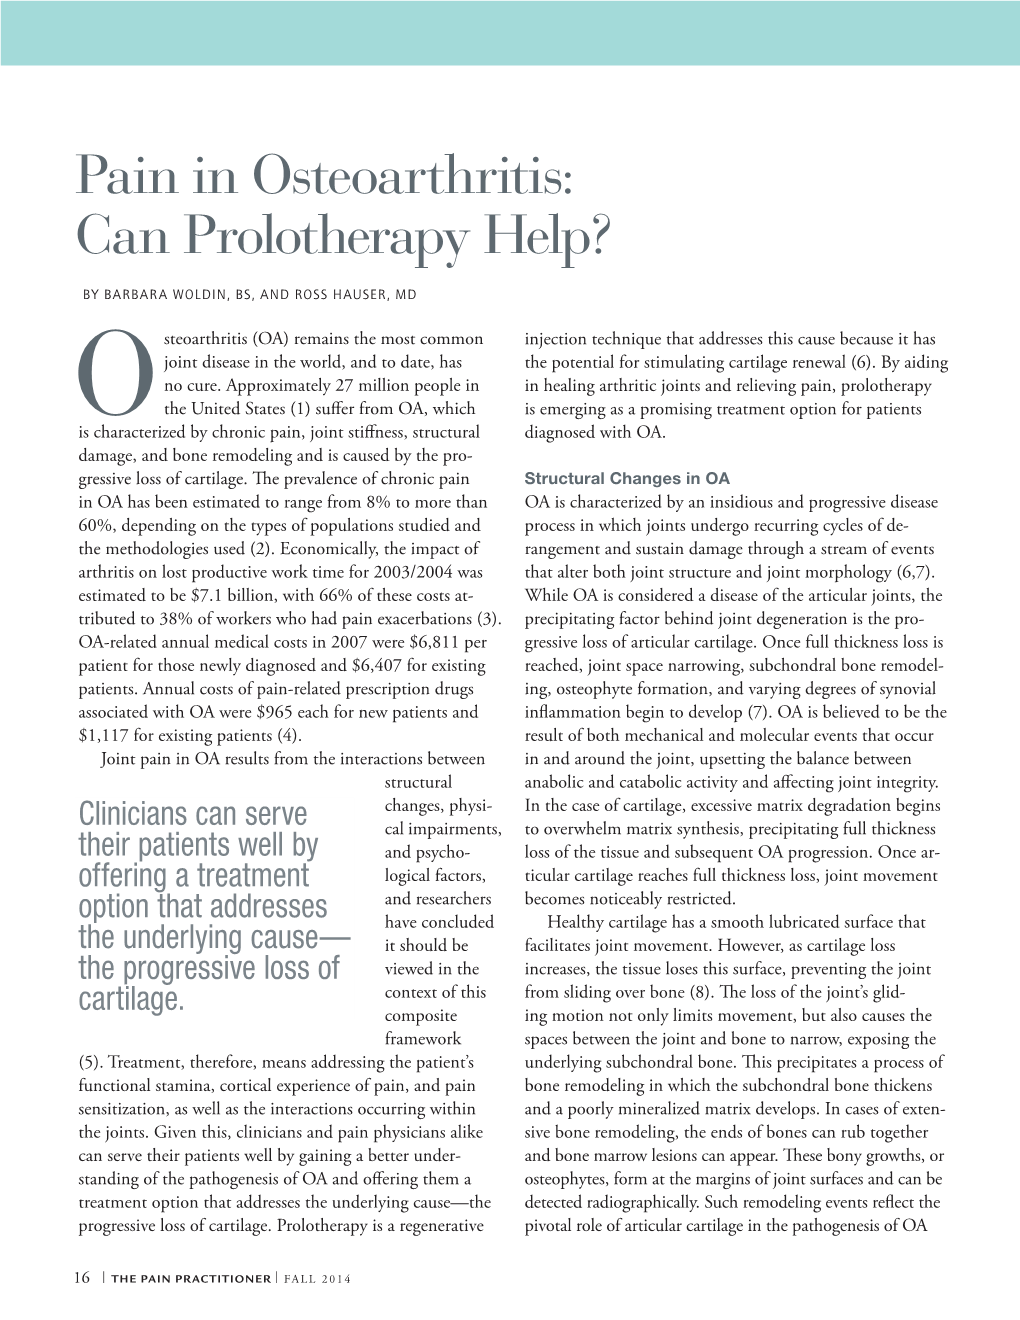 Pain in Osteoarthritis: Can Prolotherapy Help?